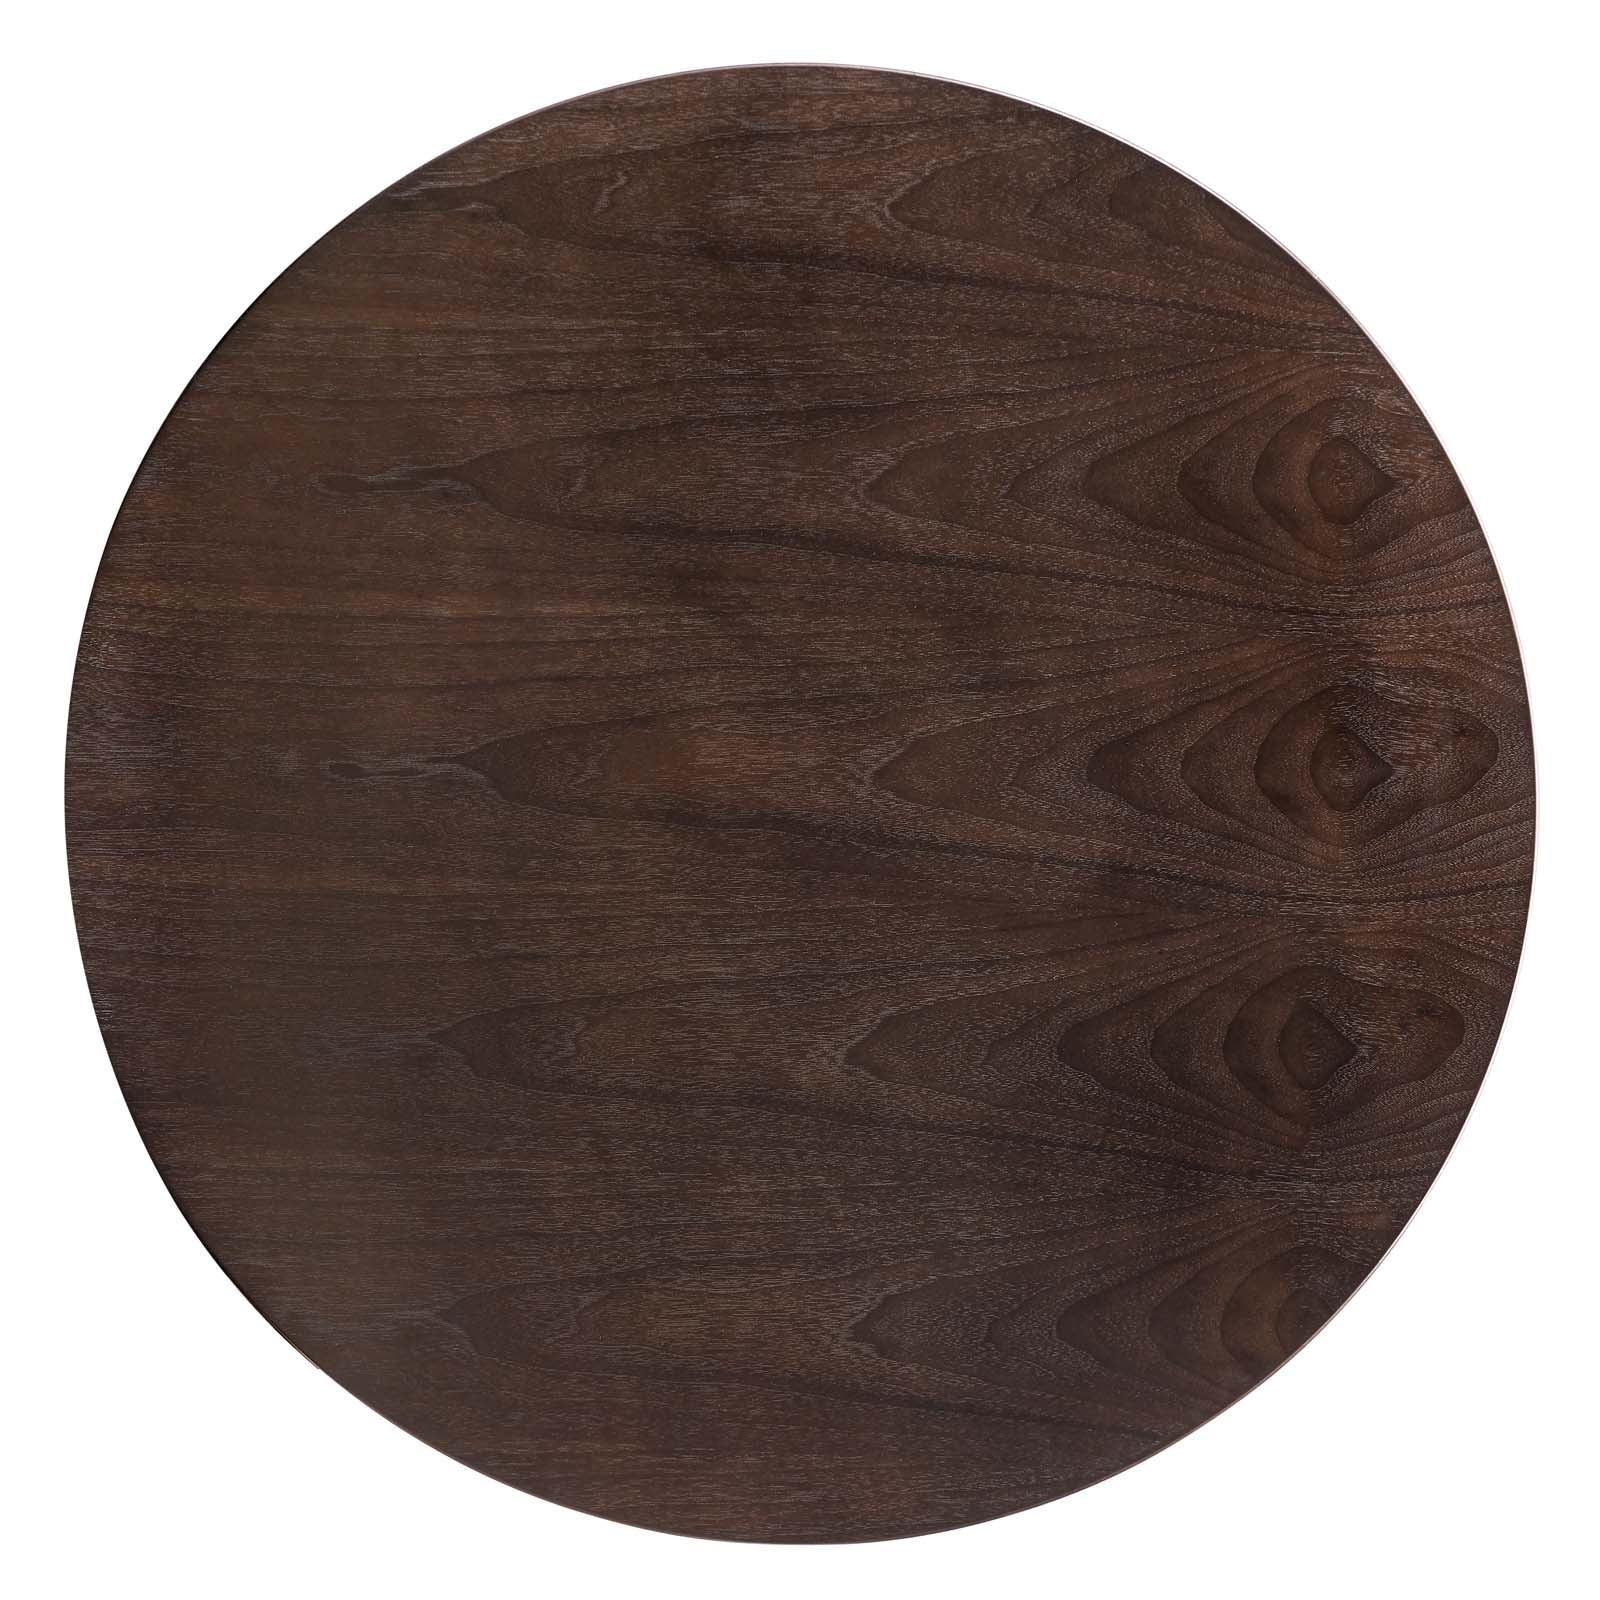 Modway Dining Tables - Zinque-40"-Dining-Table-Gold-Cherry-Walnut